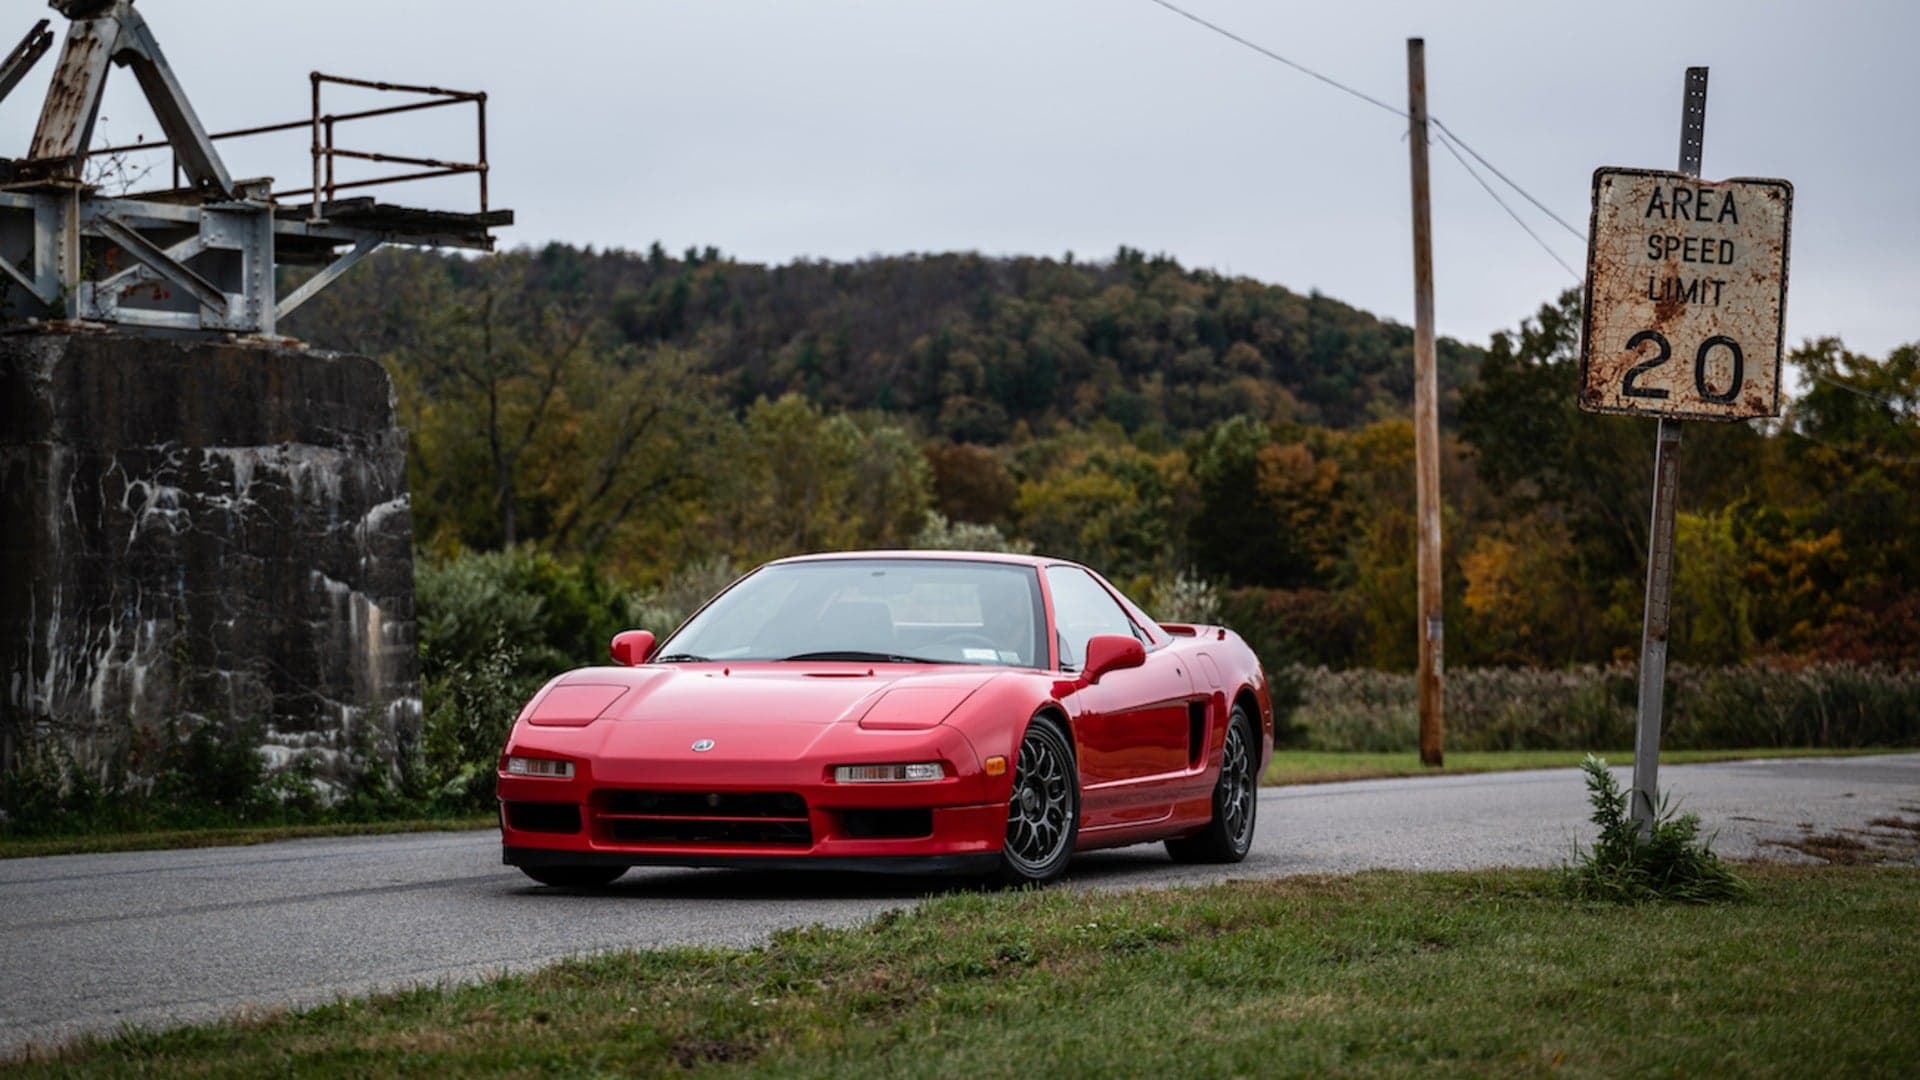 One-of-51 Acura NSX Zanardi Edition For Sale Is the Best of Its Breed